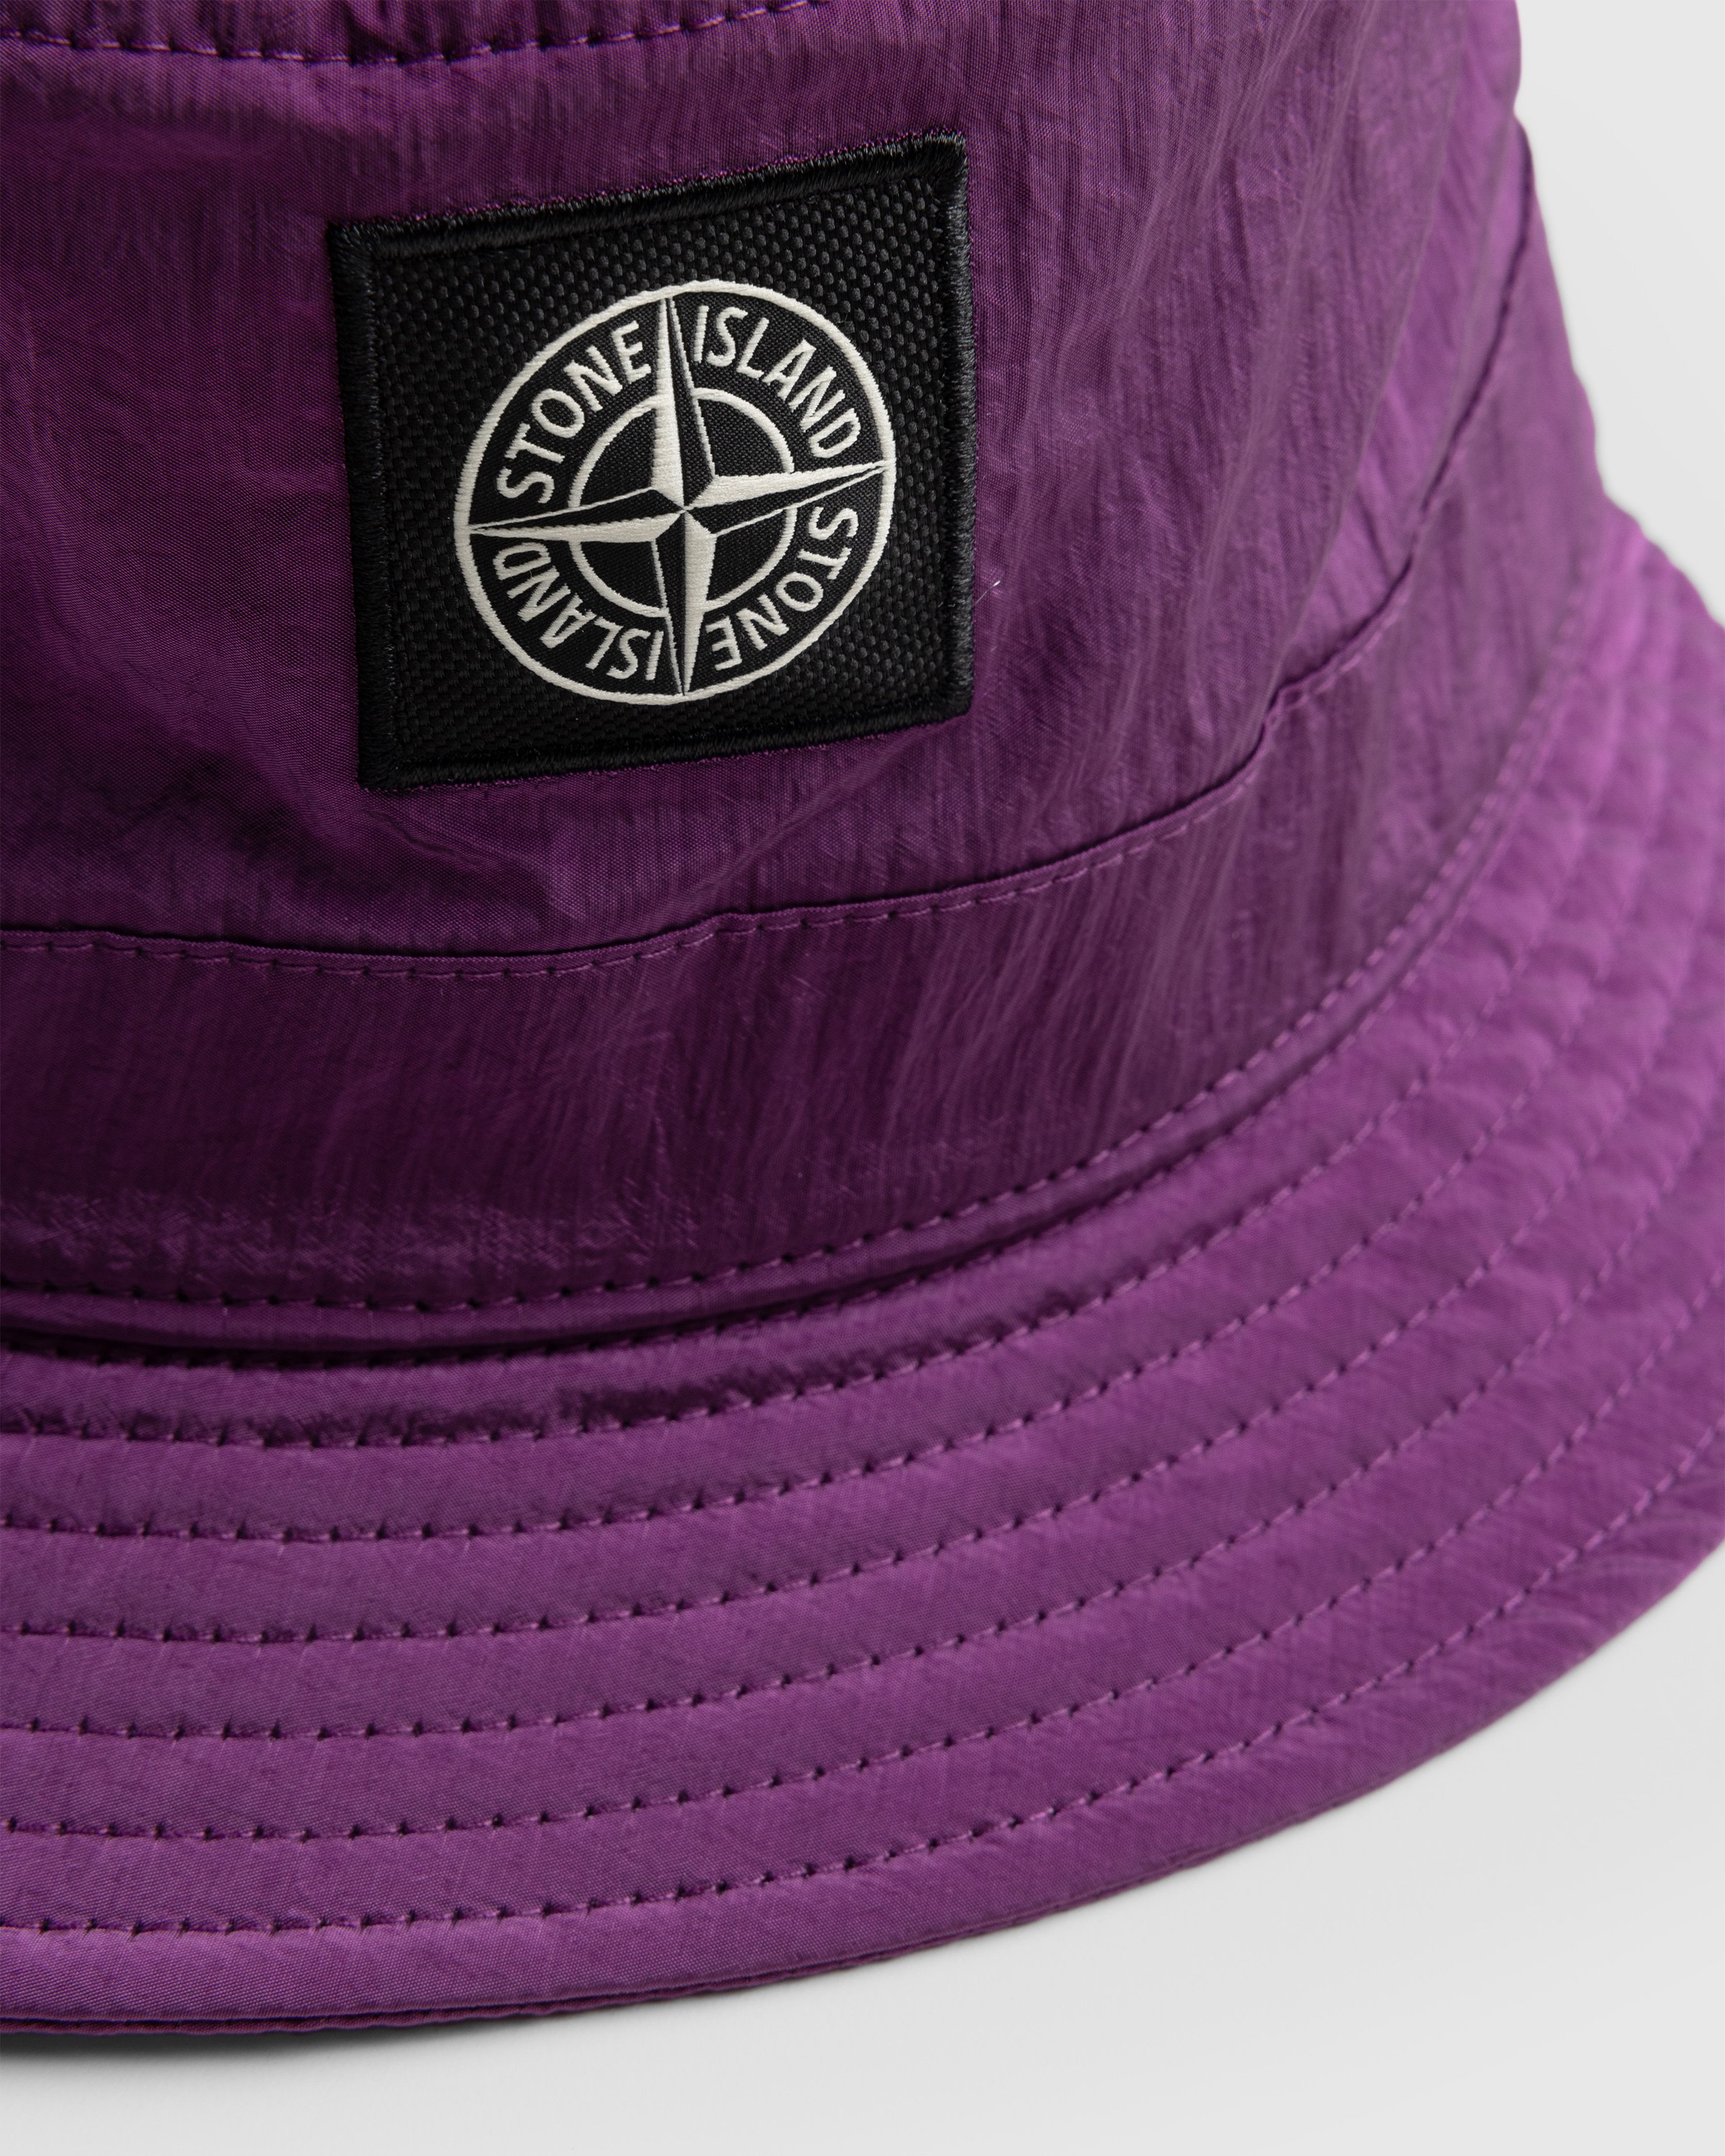 Stone Island - Cappello Pink 781599376 - Accessories - Pink - Image 4